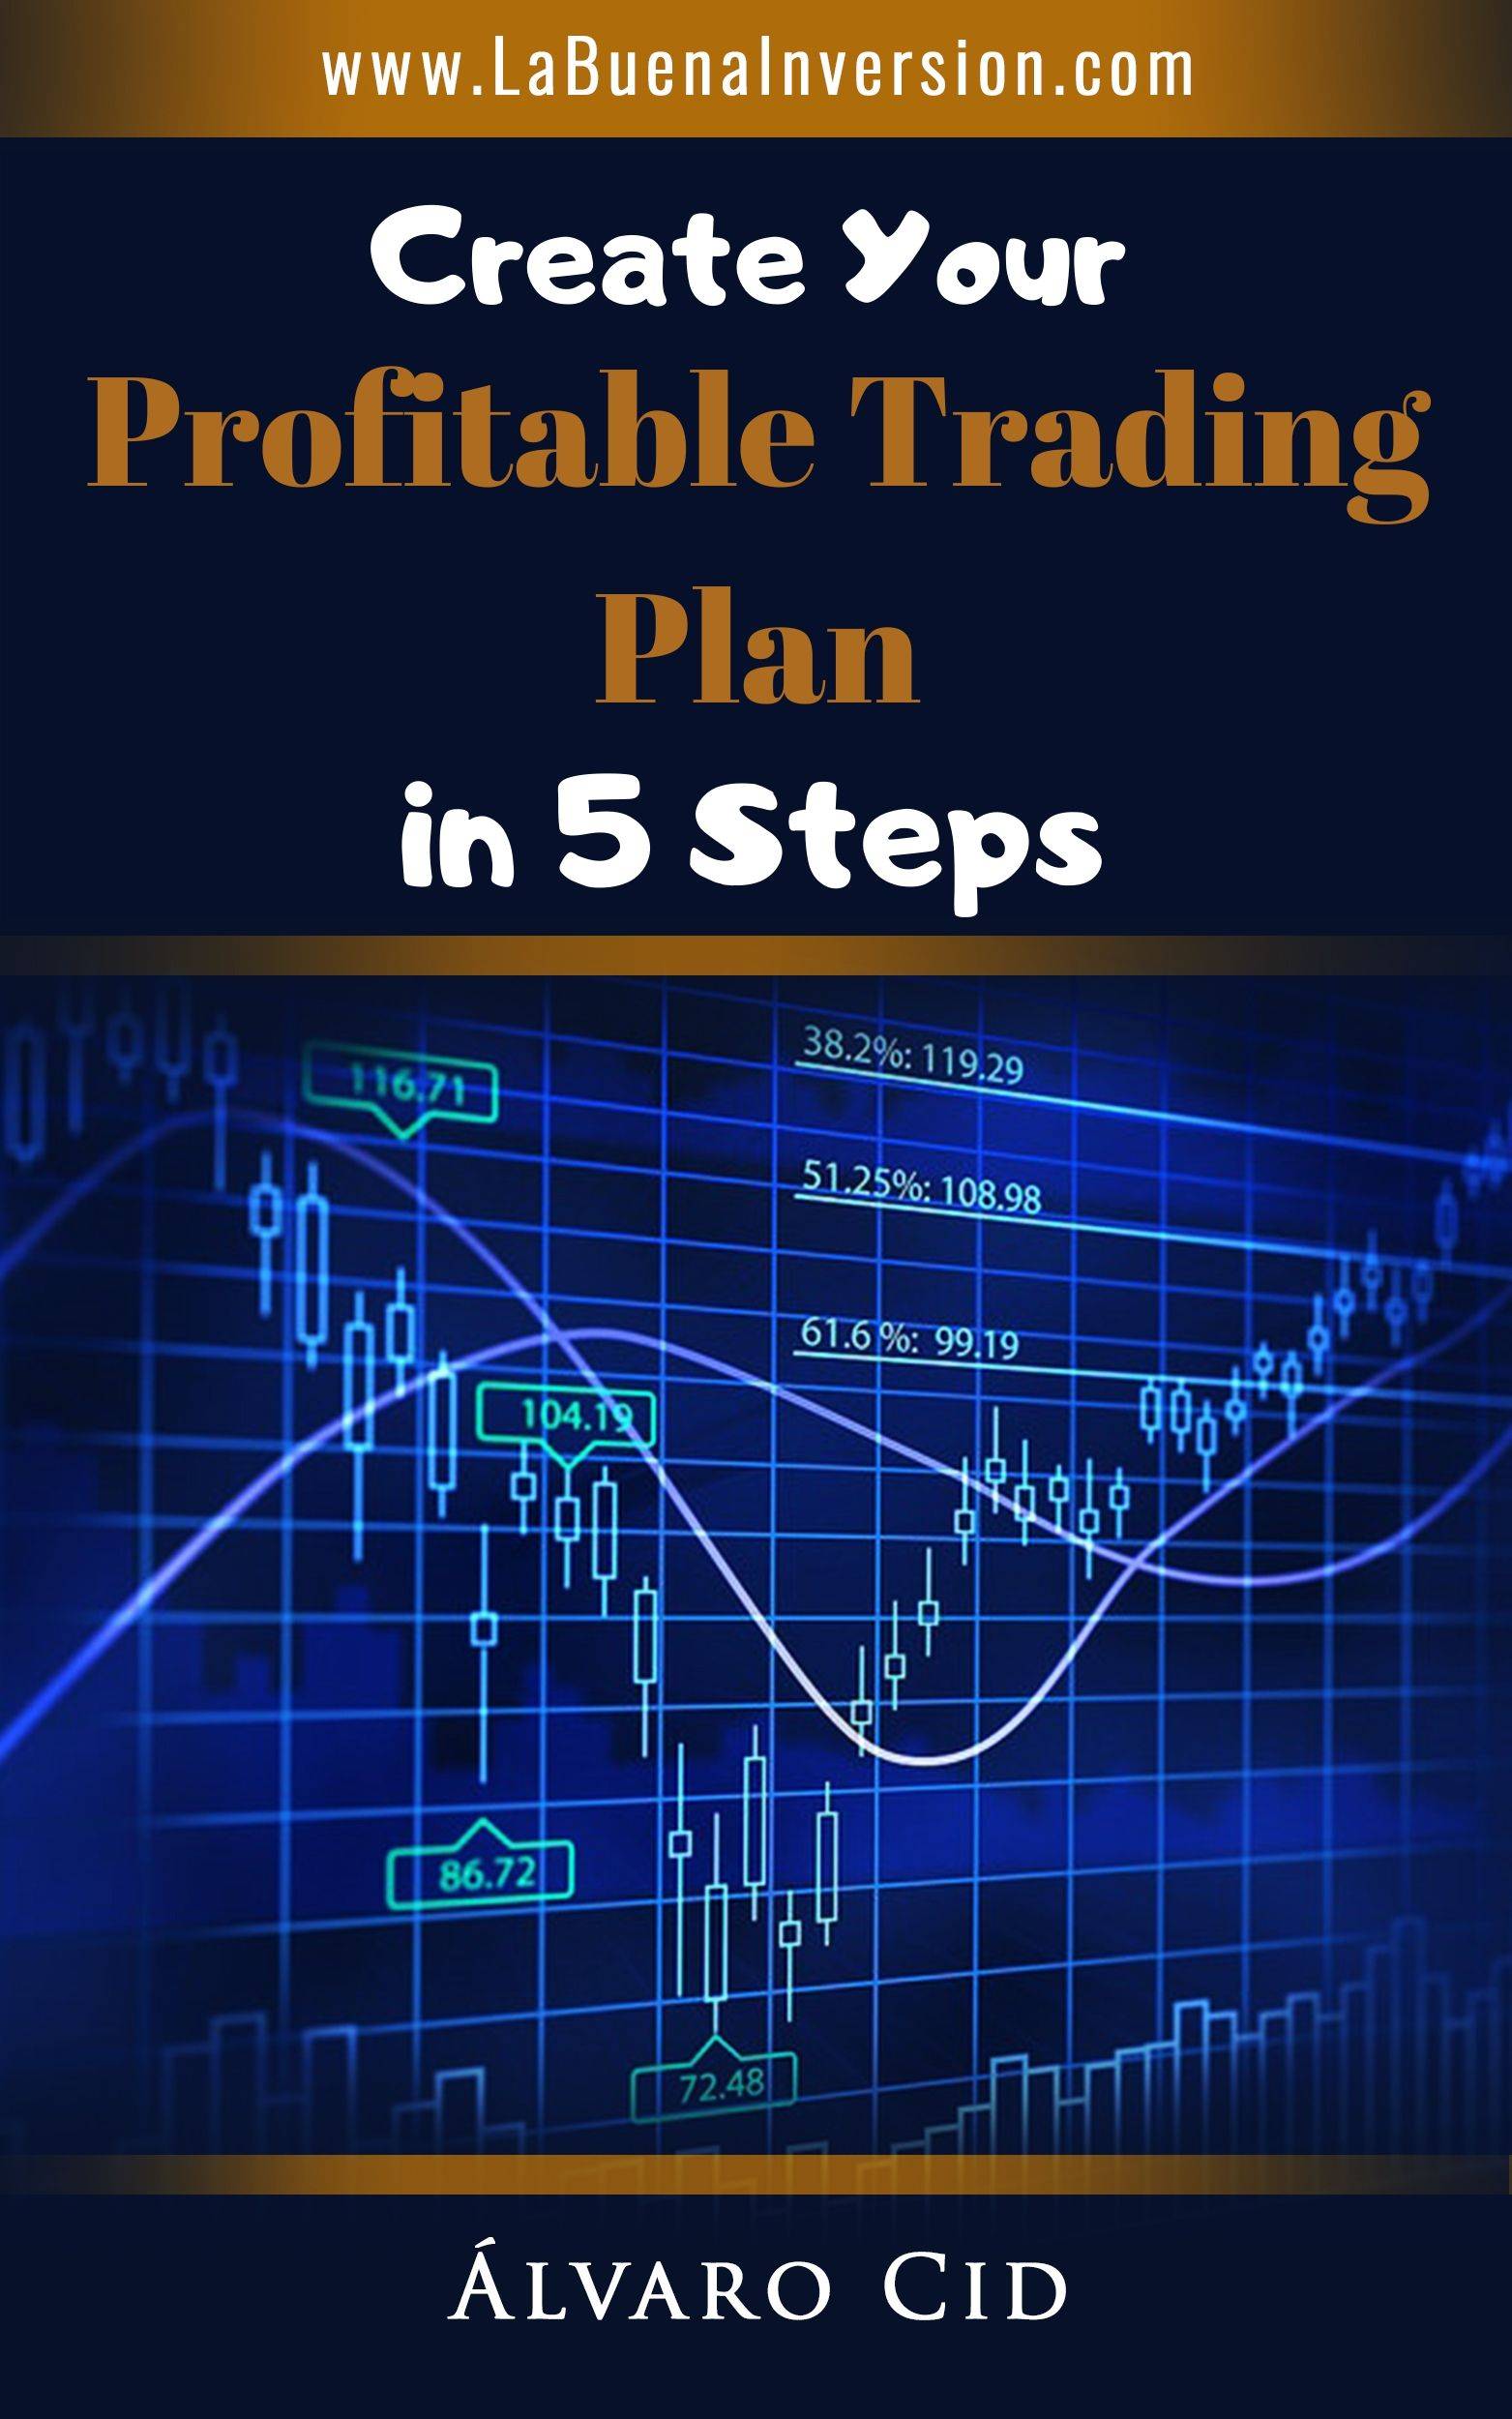 Create Your Profitable Trading Plan in 5 Steps